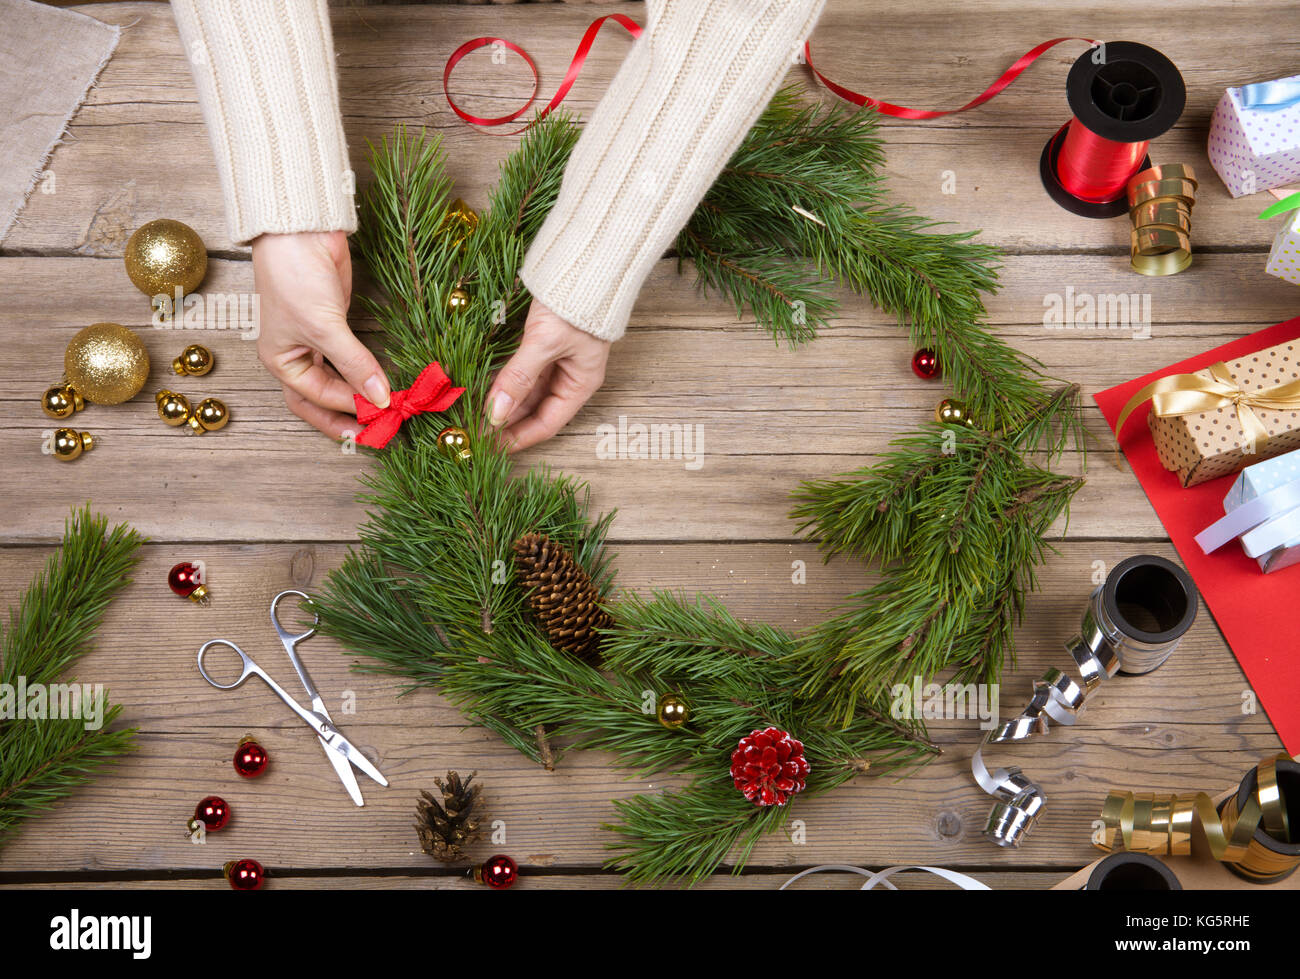 Woman is making Christmas wreath. Top view Stock Photo